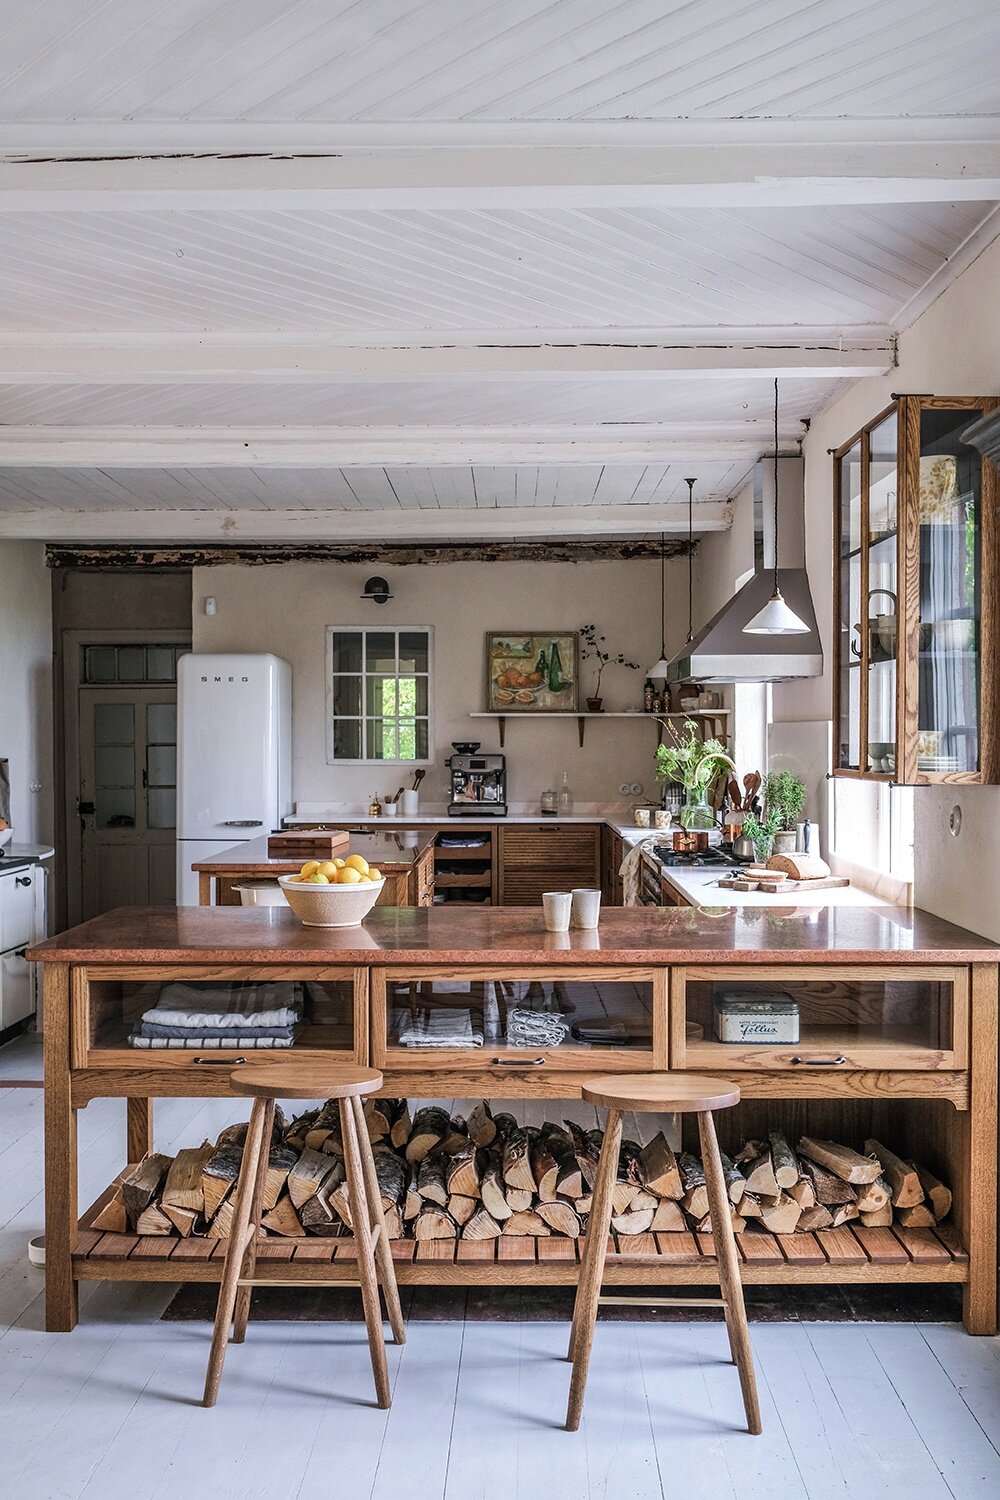 A Haberdashery style kitchen in Skåne, Sweden full of food-styling